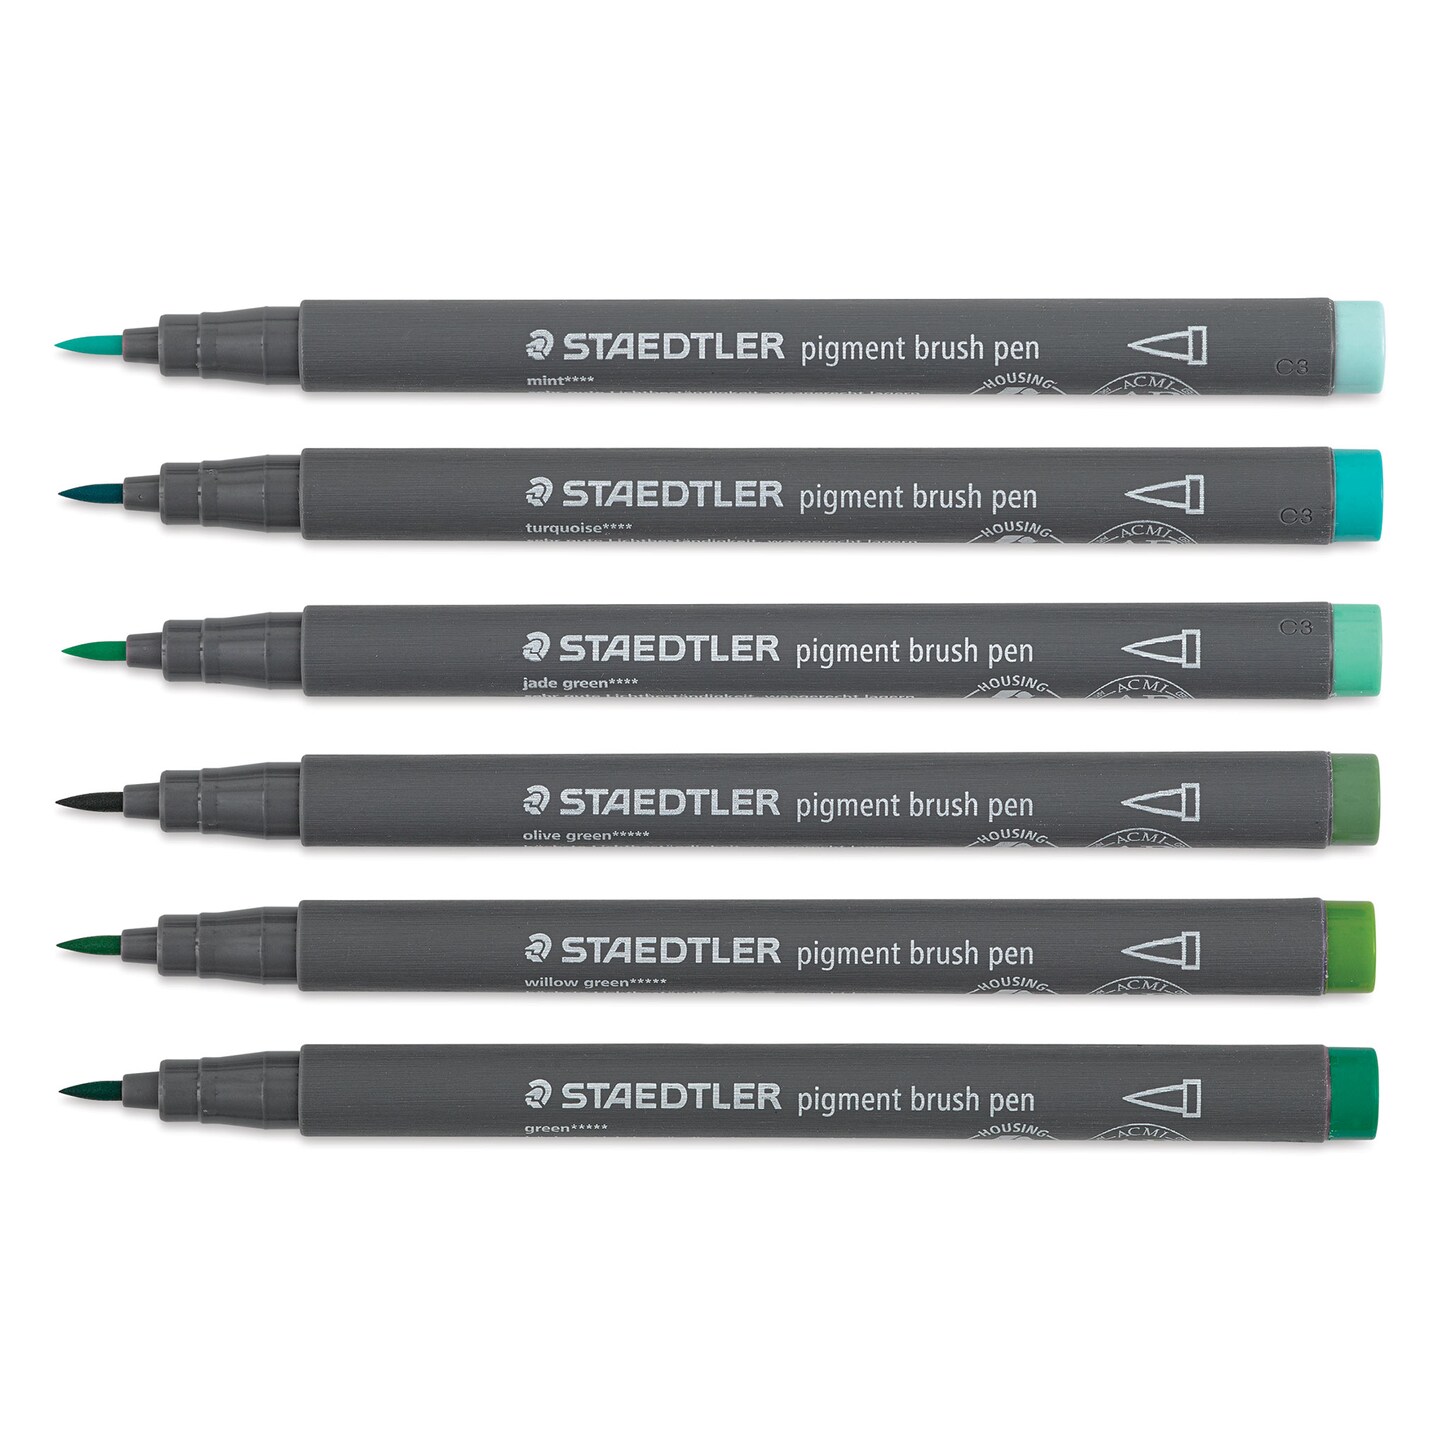 Staedtler Pigment Arts Brush Pens - Greens and Turquoises, Set of 6